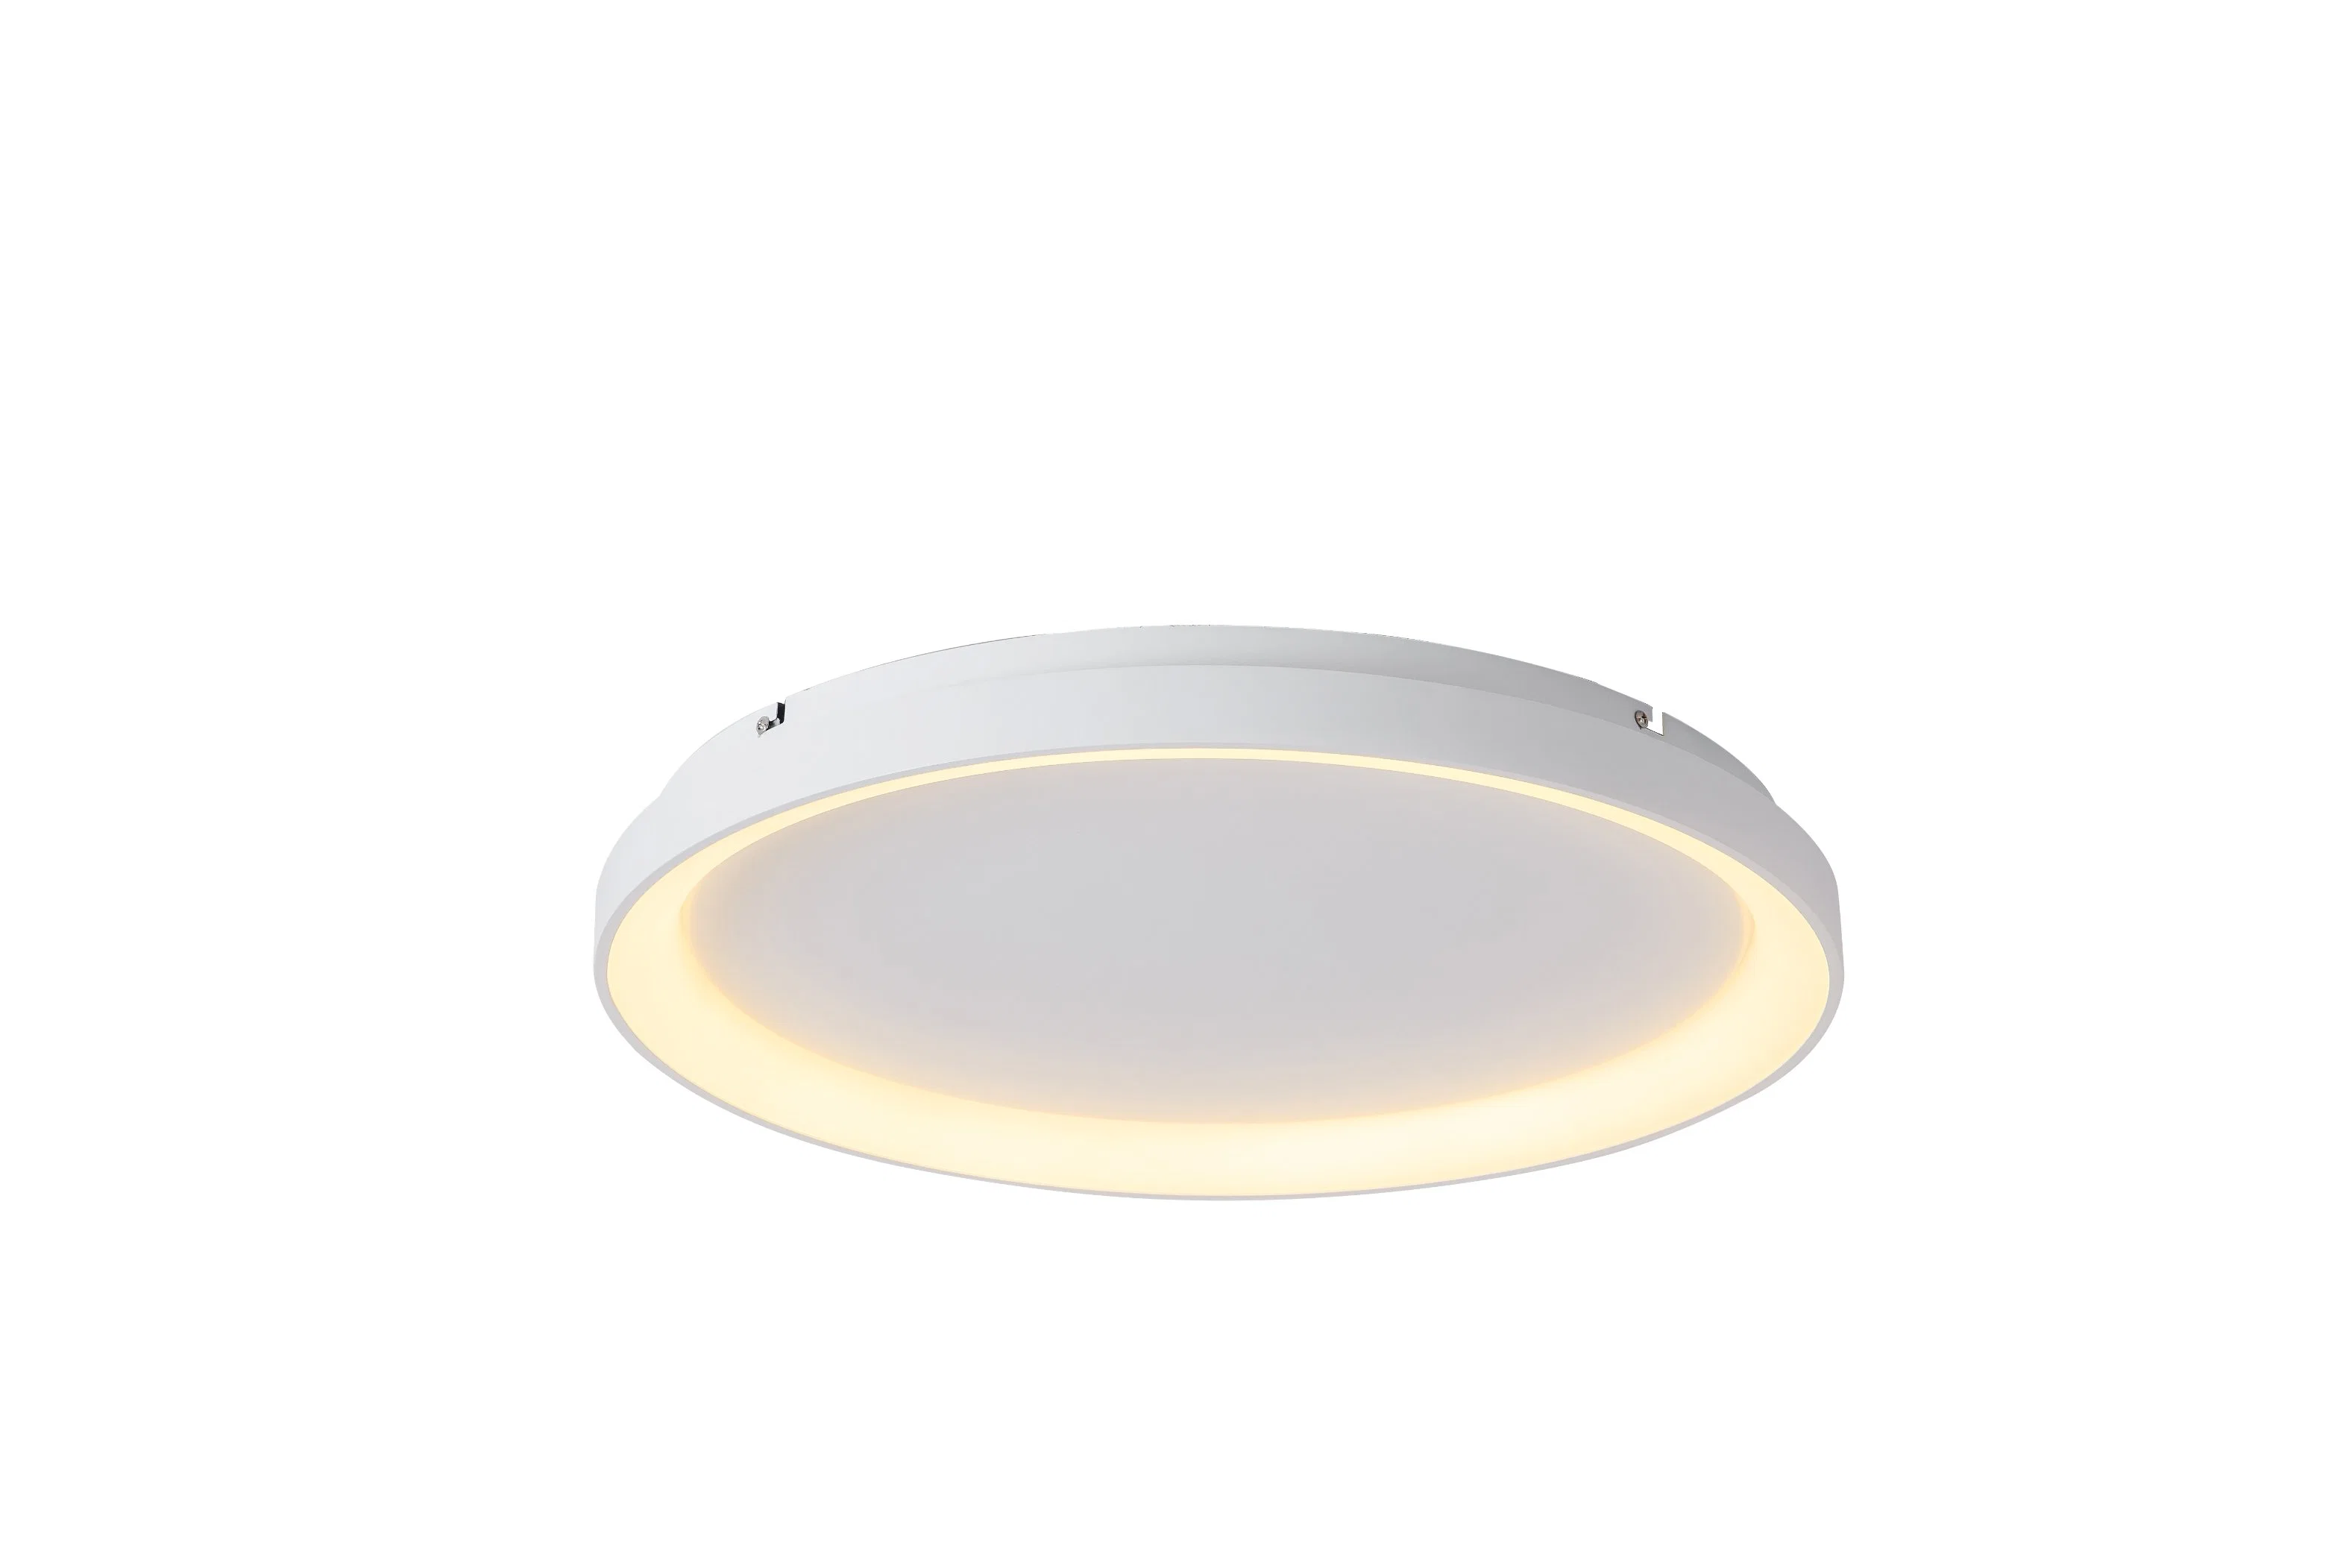 Masivel Factory Round Indoor Decoration Modern Ceiling Lighting with CCT Switch Home LED Ceiling Lamp